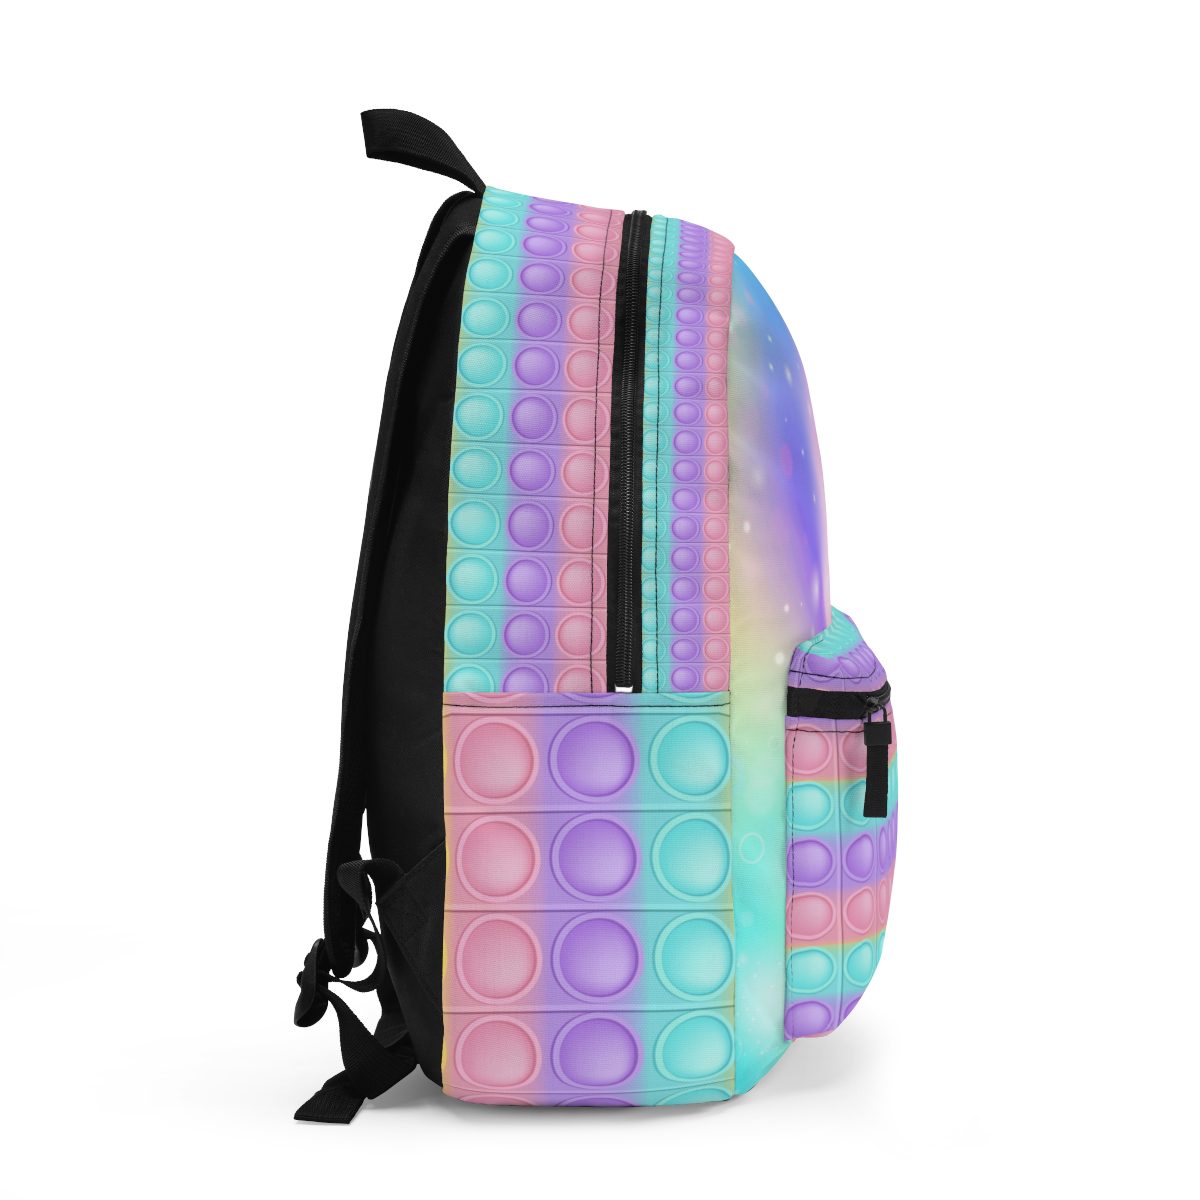 POP IT Simulation style and Bubble Gum Galaxy Backpack Cool Kiddo 12